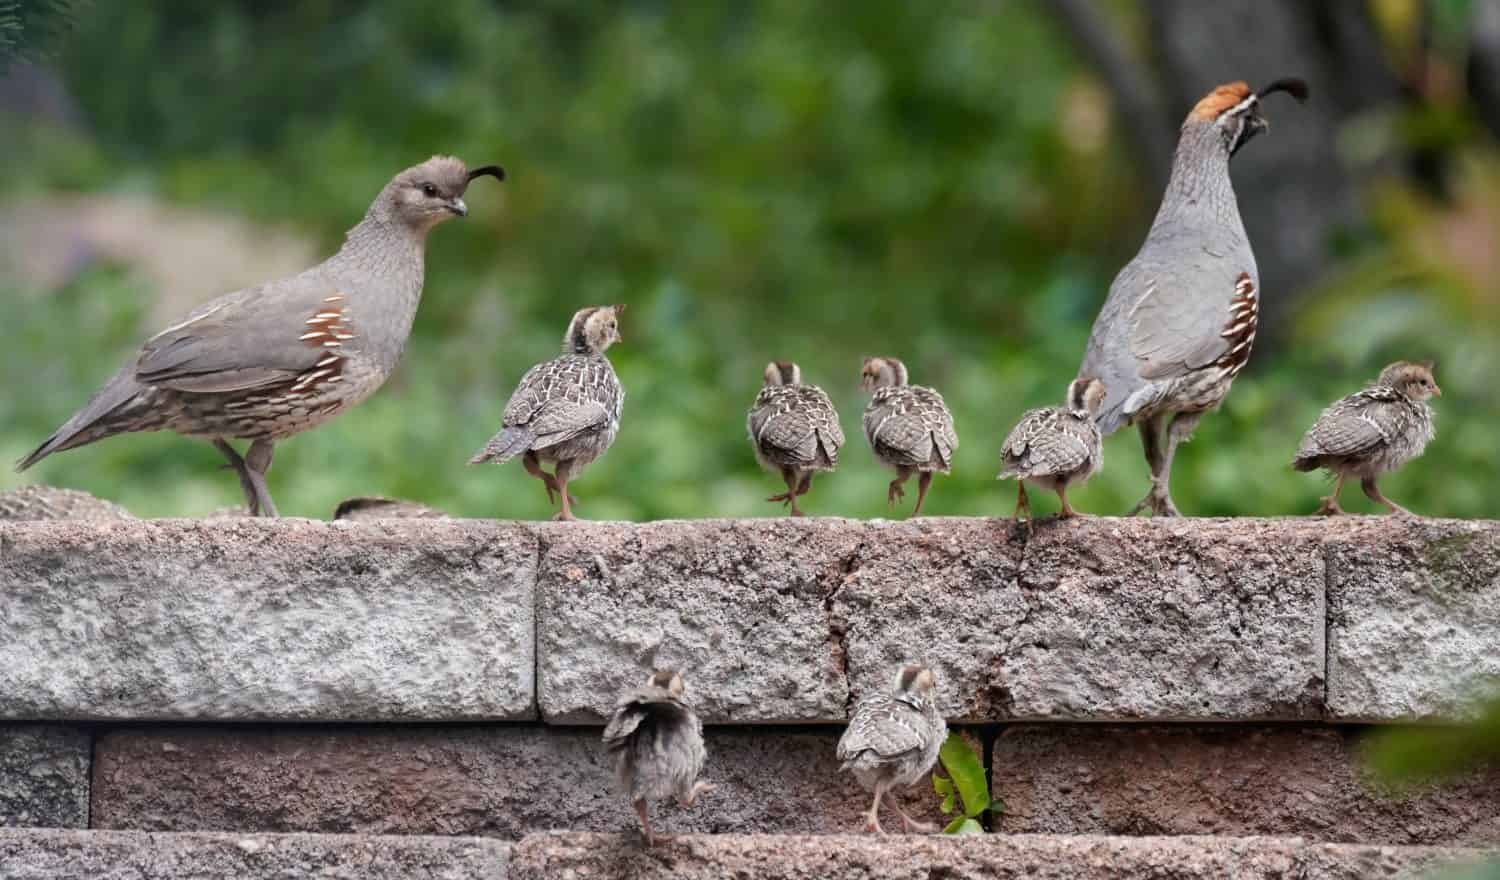 A family of quail chicks have an outing with Mom and Dad.